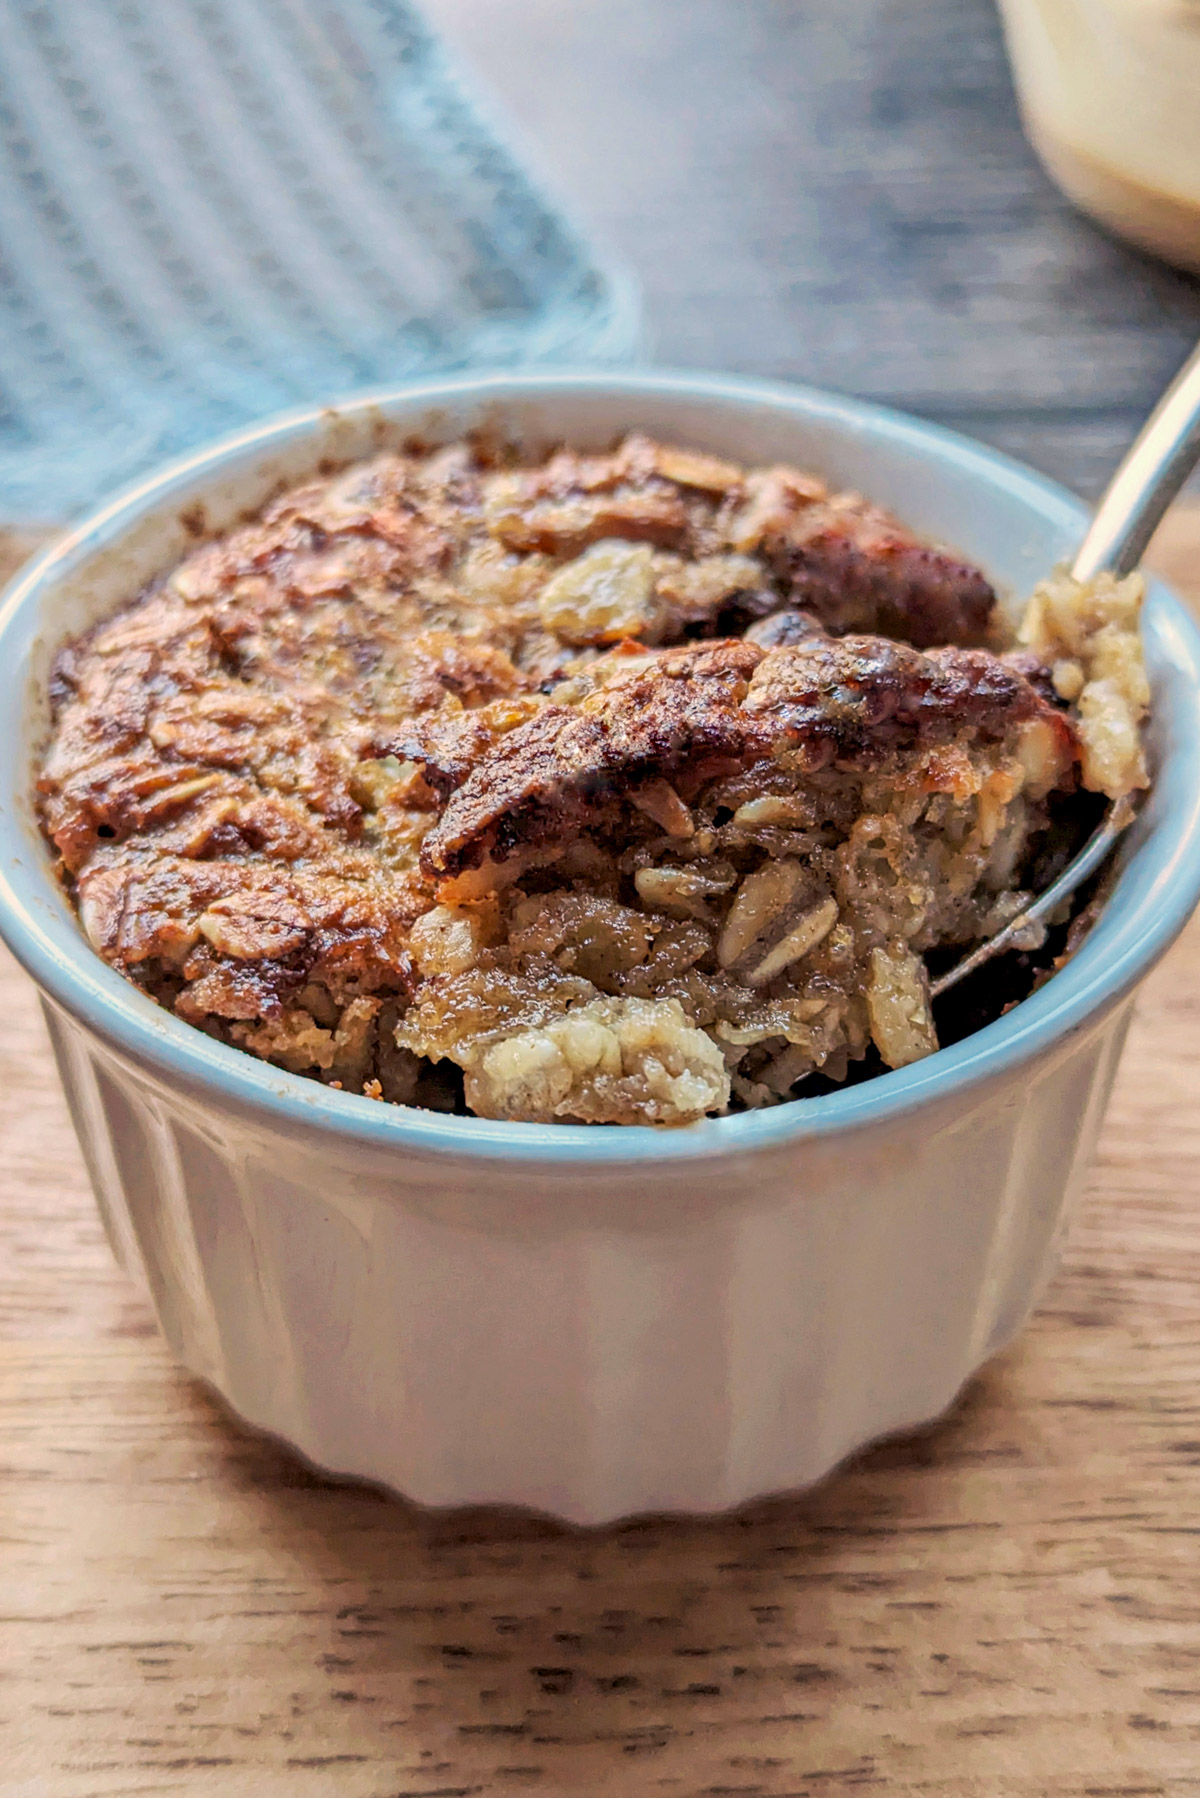 Baked oats without banana in soufflé cups.